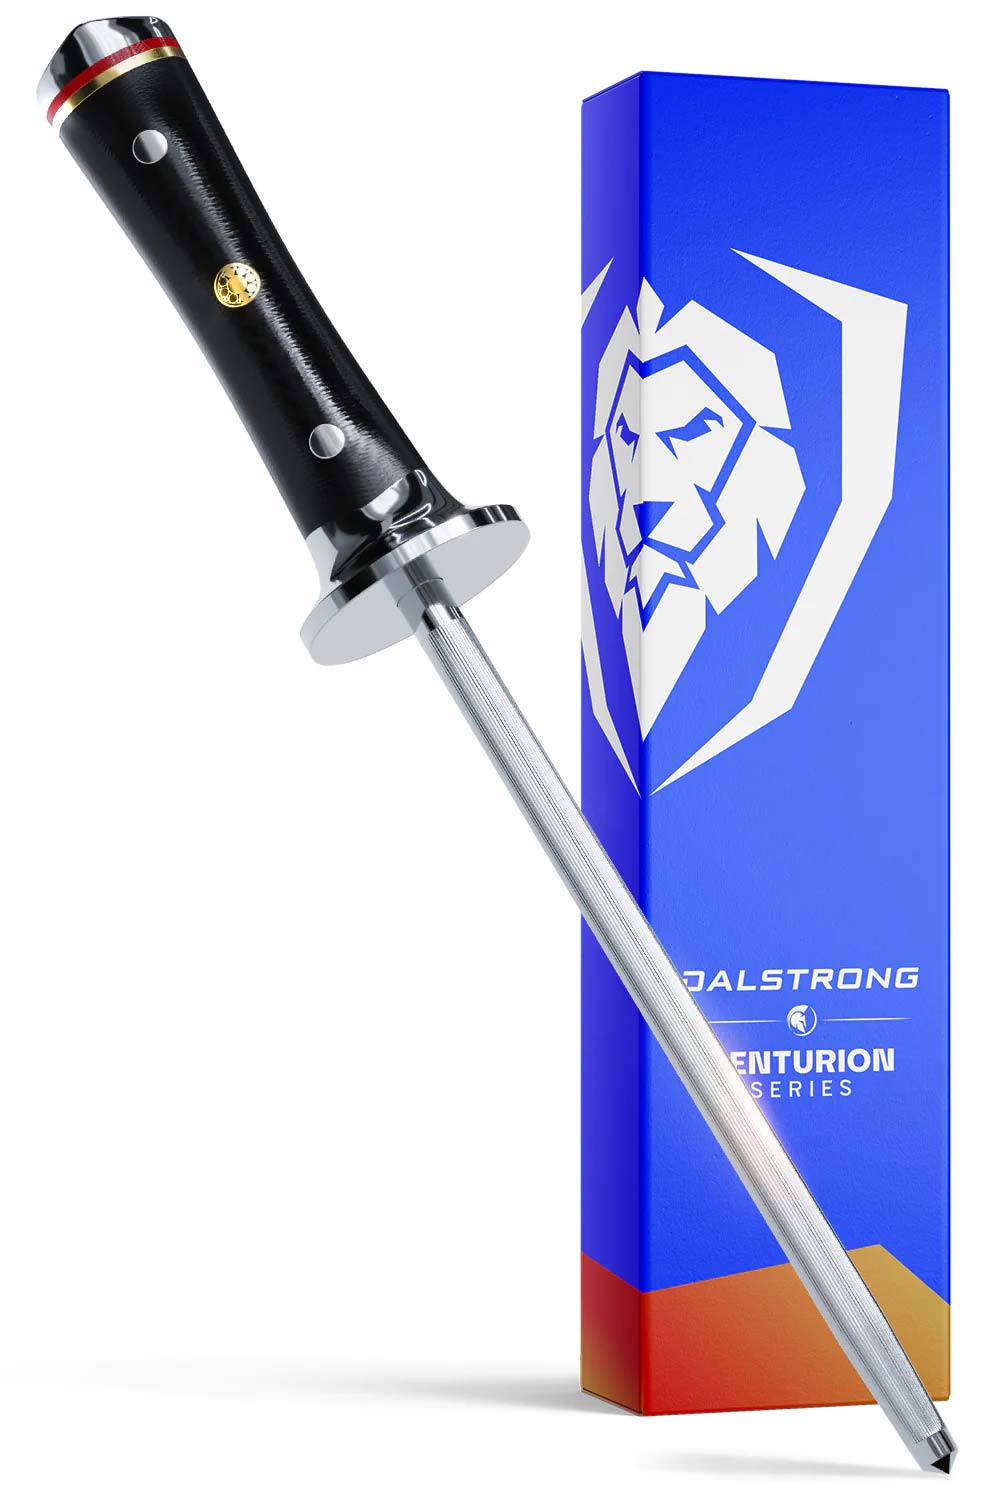 Dalstrong centurion series 8 inch honing steel with black handle in front of it's premium packaging.